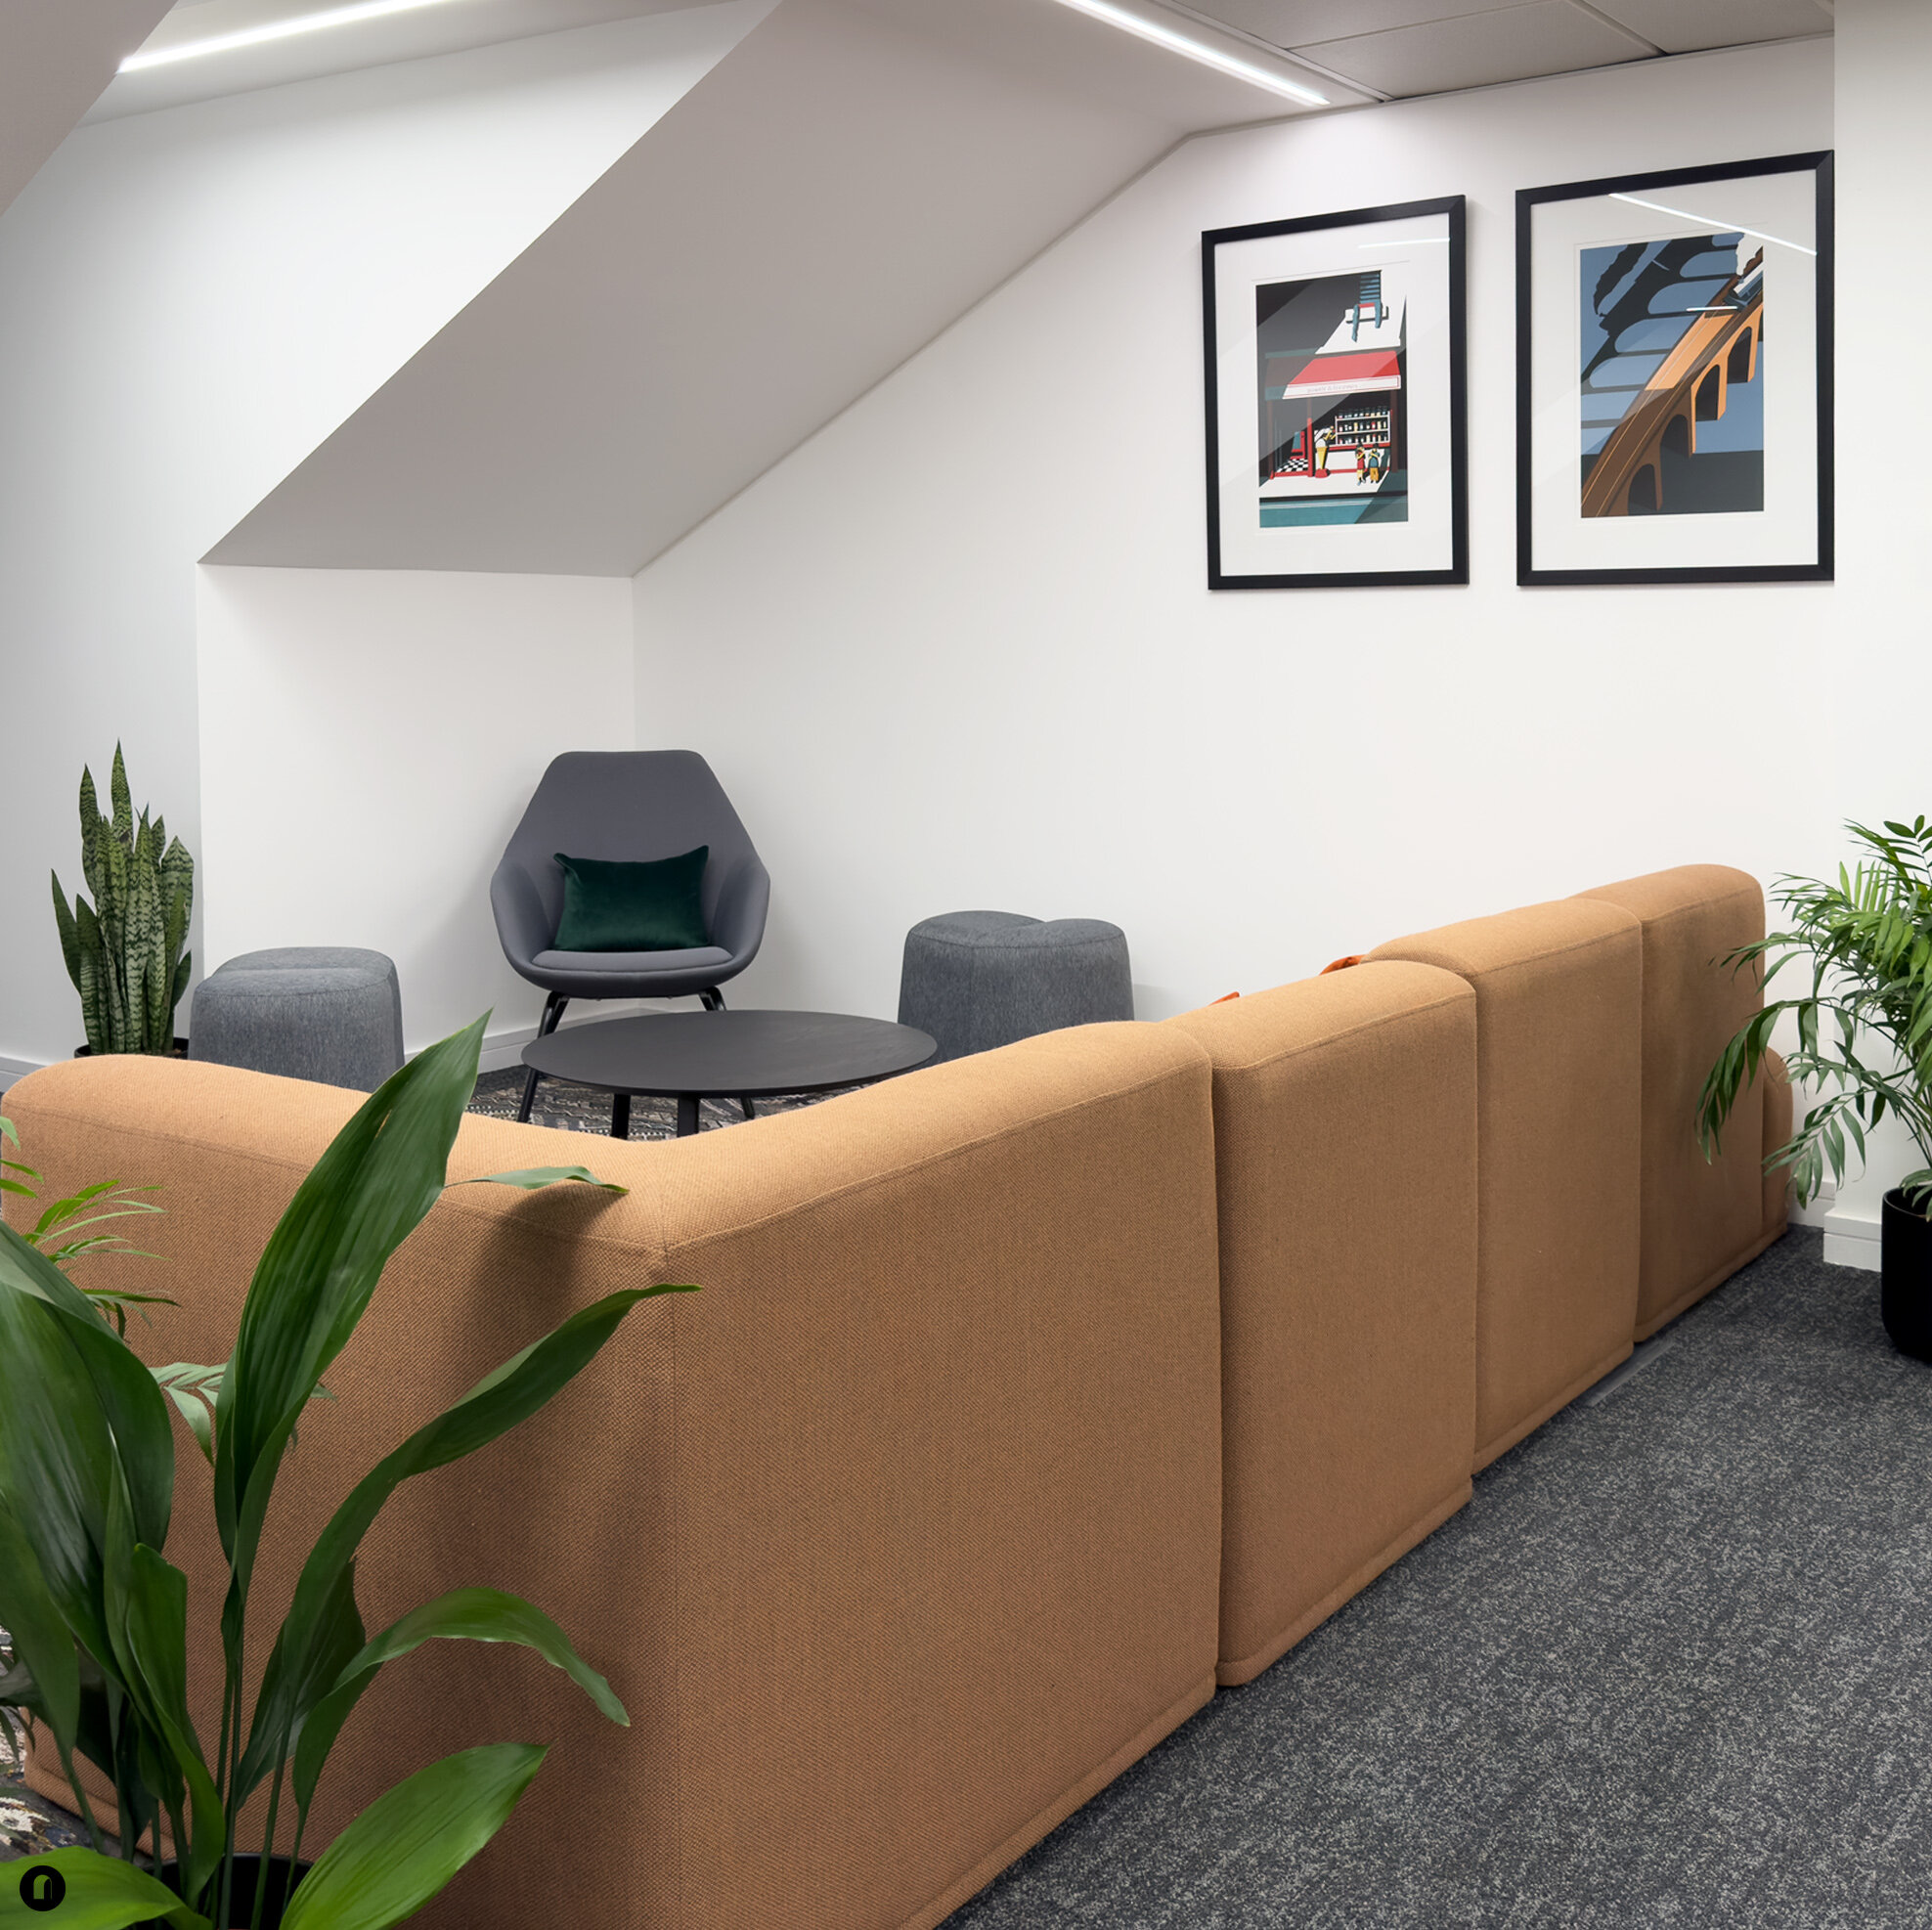 On West George Street, Glasgow, Arch Interiors dressed up the recently renovated office spaces.

🖼️ We've filled the space with beautiful art from local artists, bringing the essence of Glasgow's culture to the walls. Our careful selection extends t